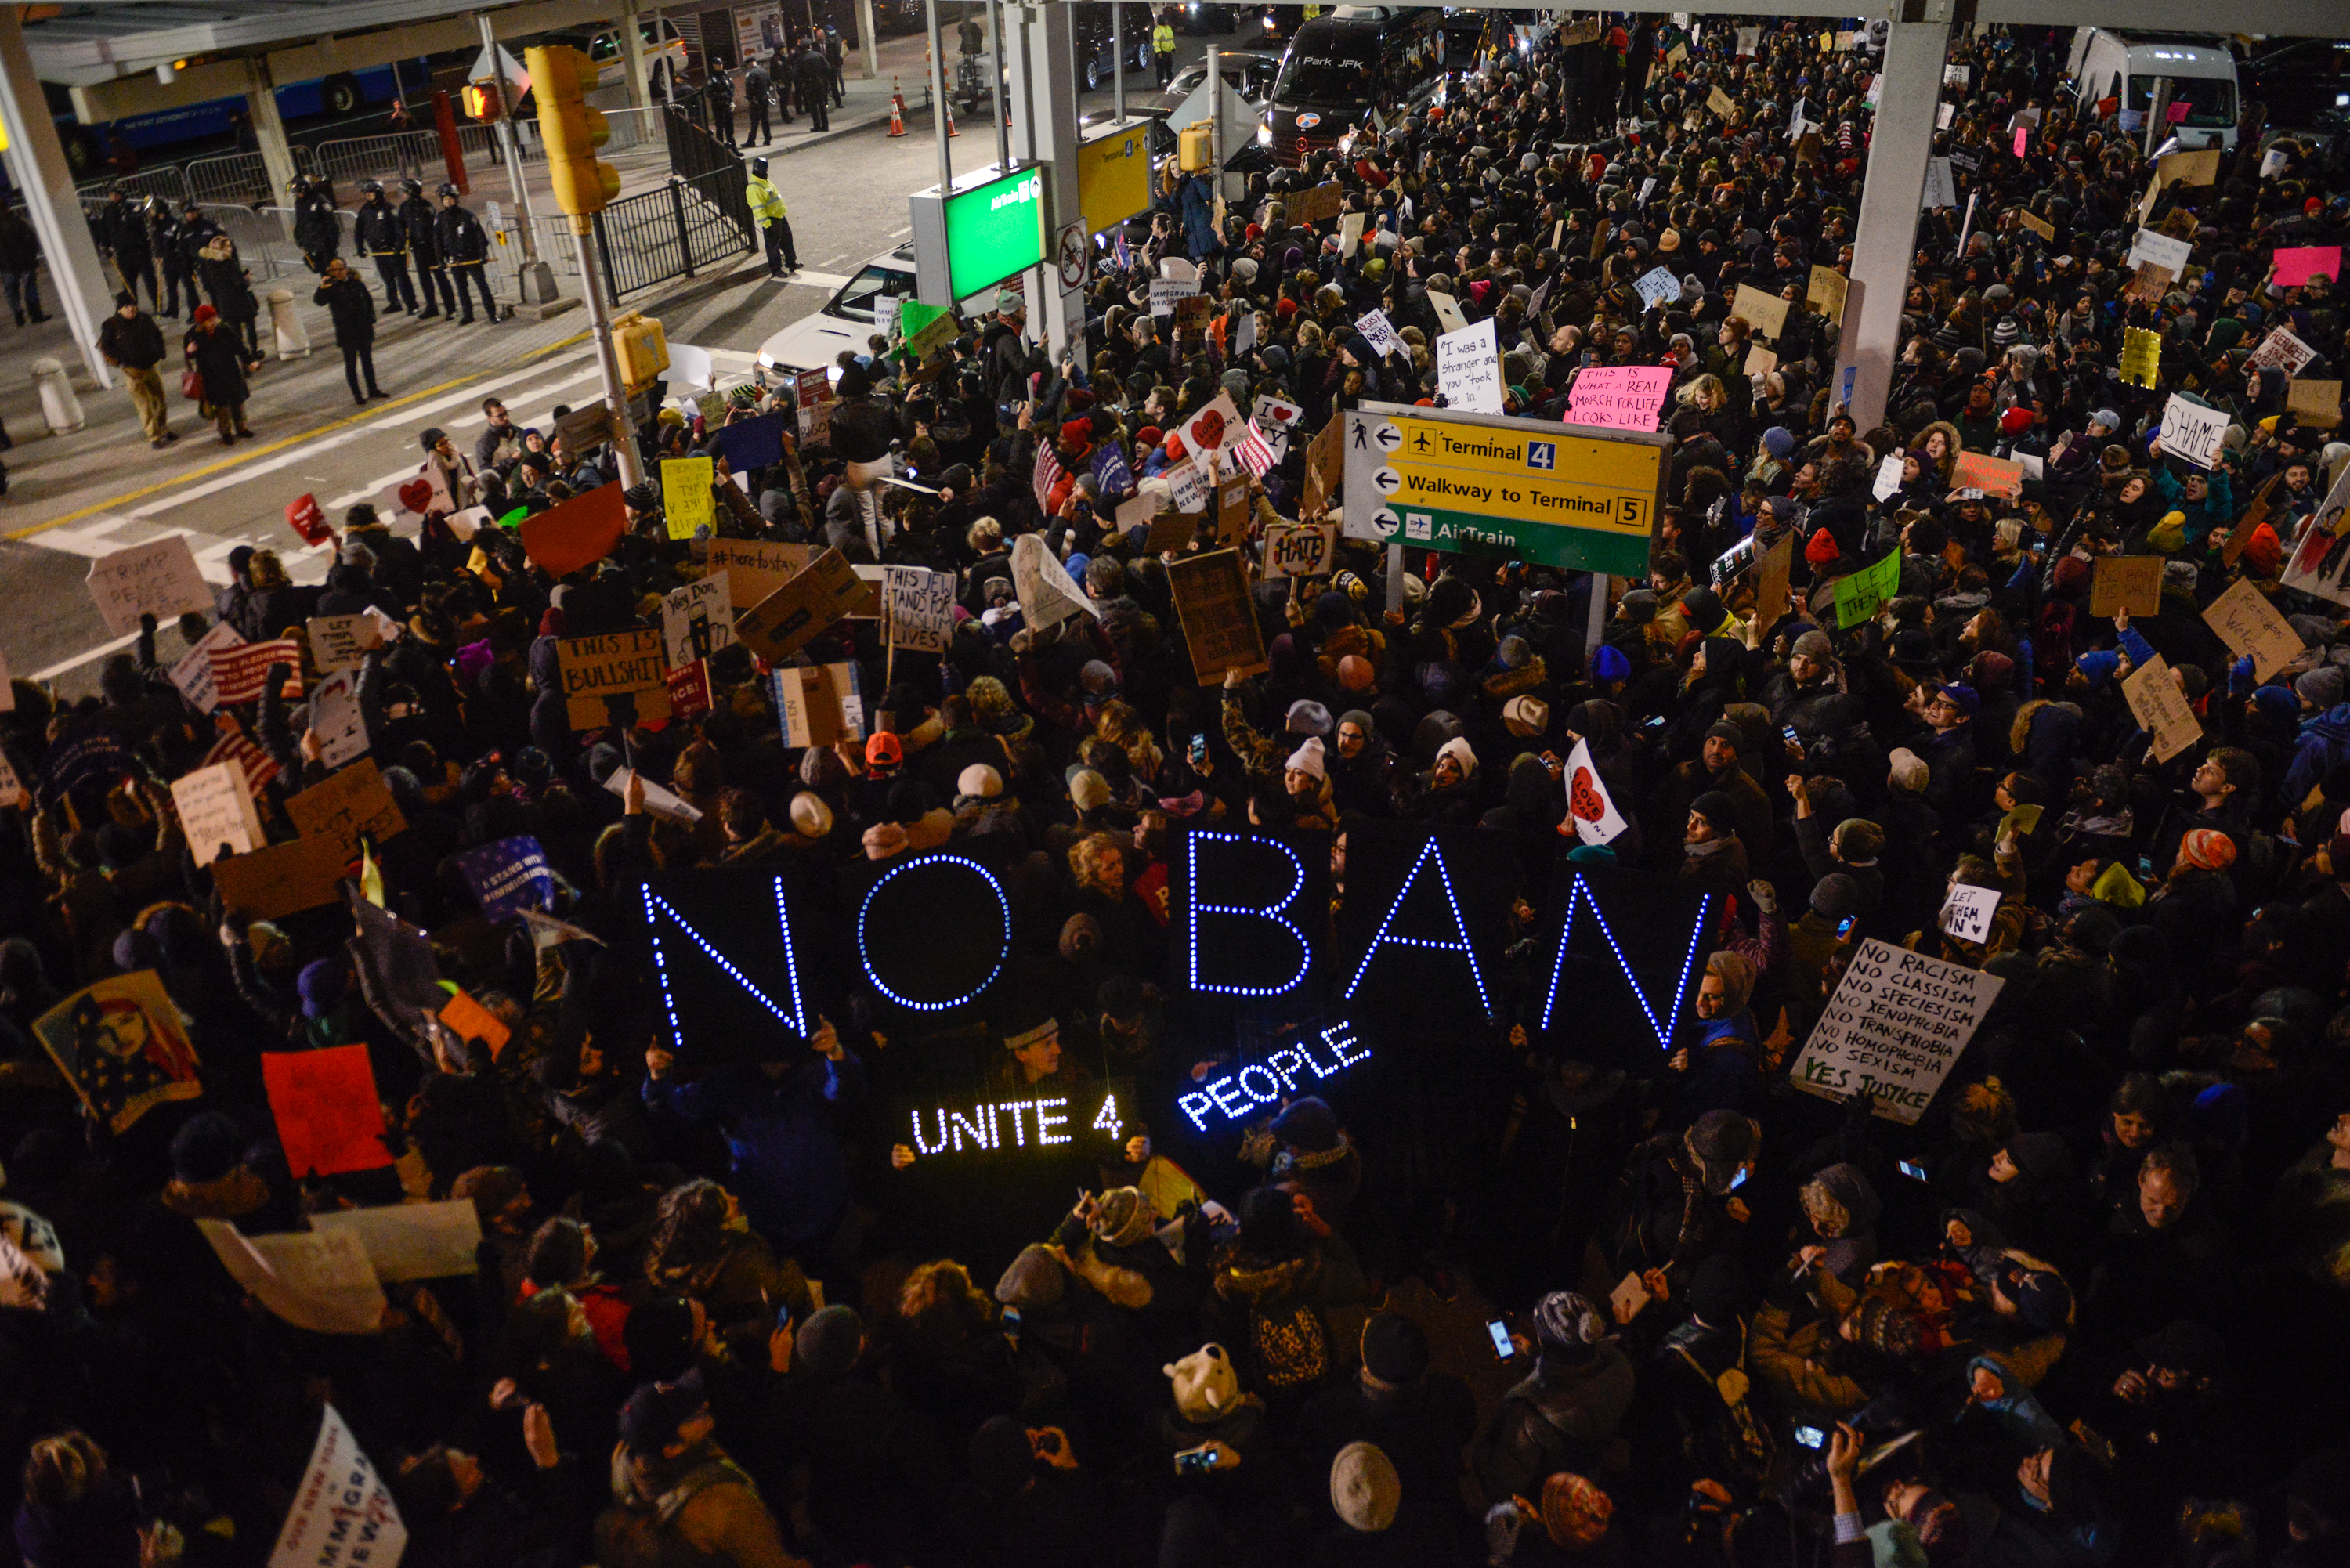 Protesters rally during a demonstration against the Muslim immigration ban at JFK International Airport on Jan. 28, 2017, in New York City (Stephanie Keith—Getty Images)